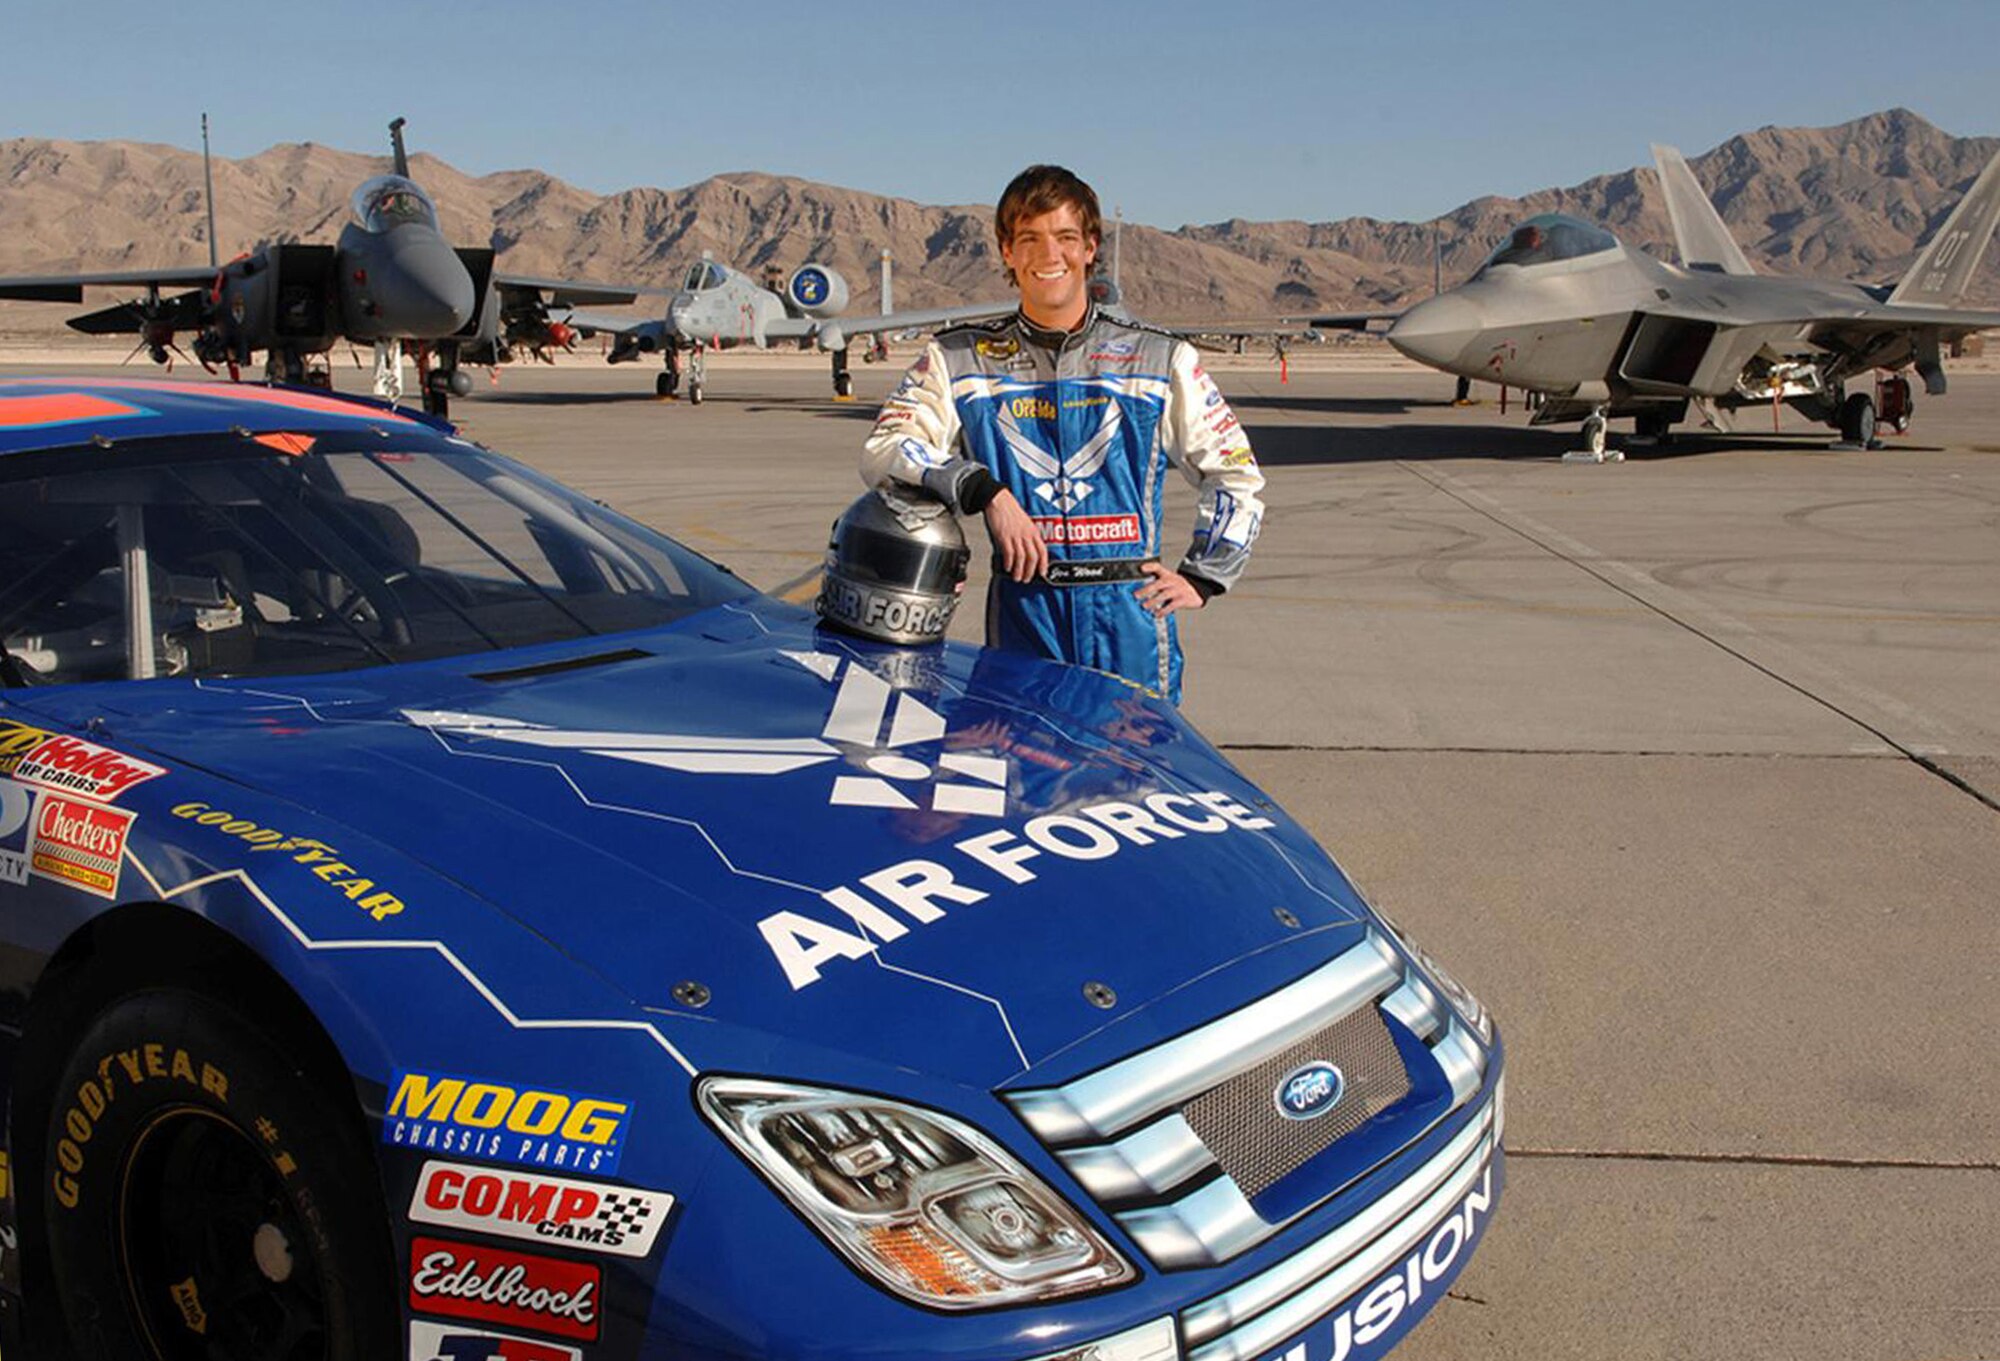 NASCAR driver Jon Wood poses for an Air Force Recruiting Service publicity photo. Driving car No. 21 Wood made his professional Nextel Cup Series debut in the Air Force paint scheme Ford Fusion at Las Vegas early in the 2007 season.
(by Master Sgt. Scott Reed)